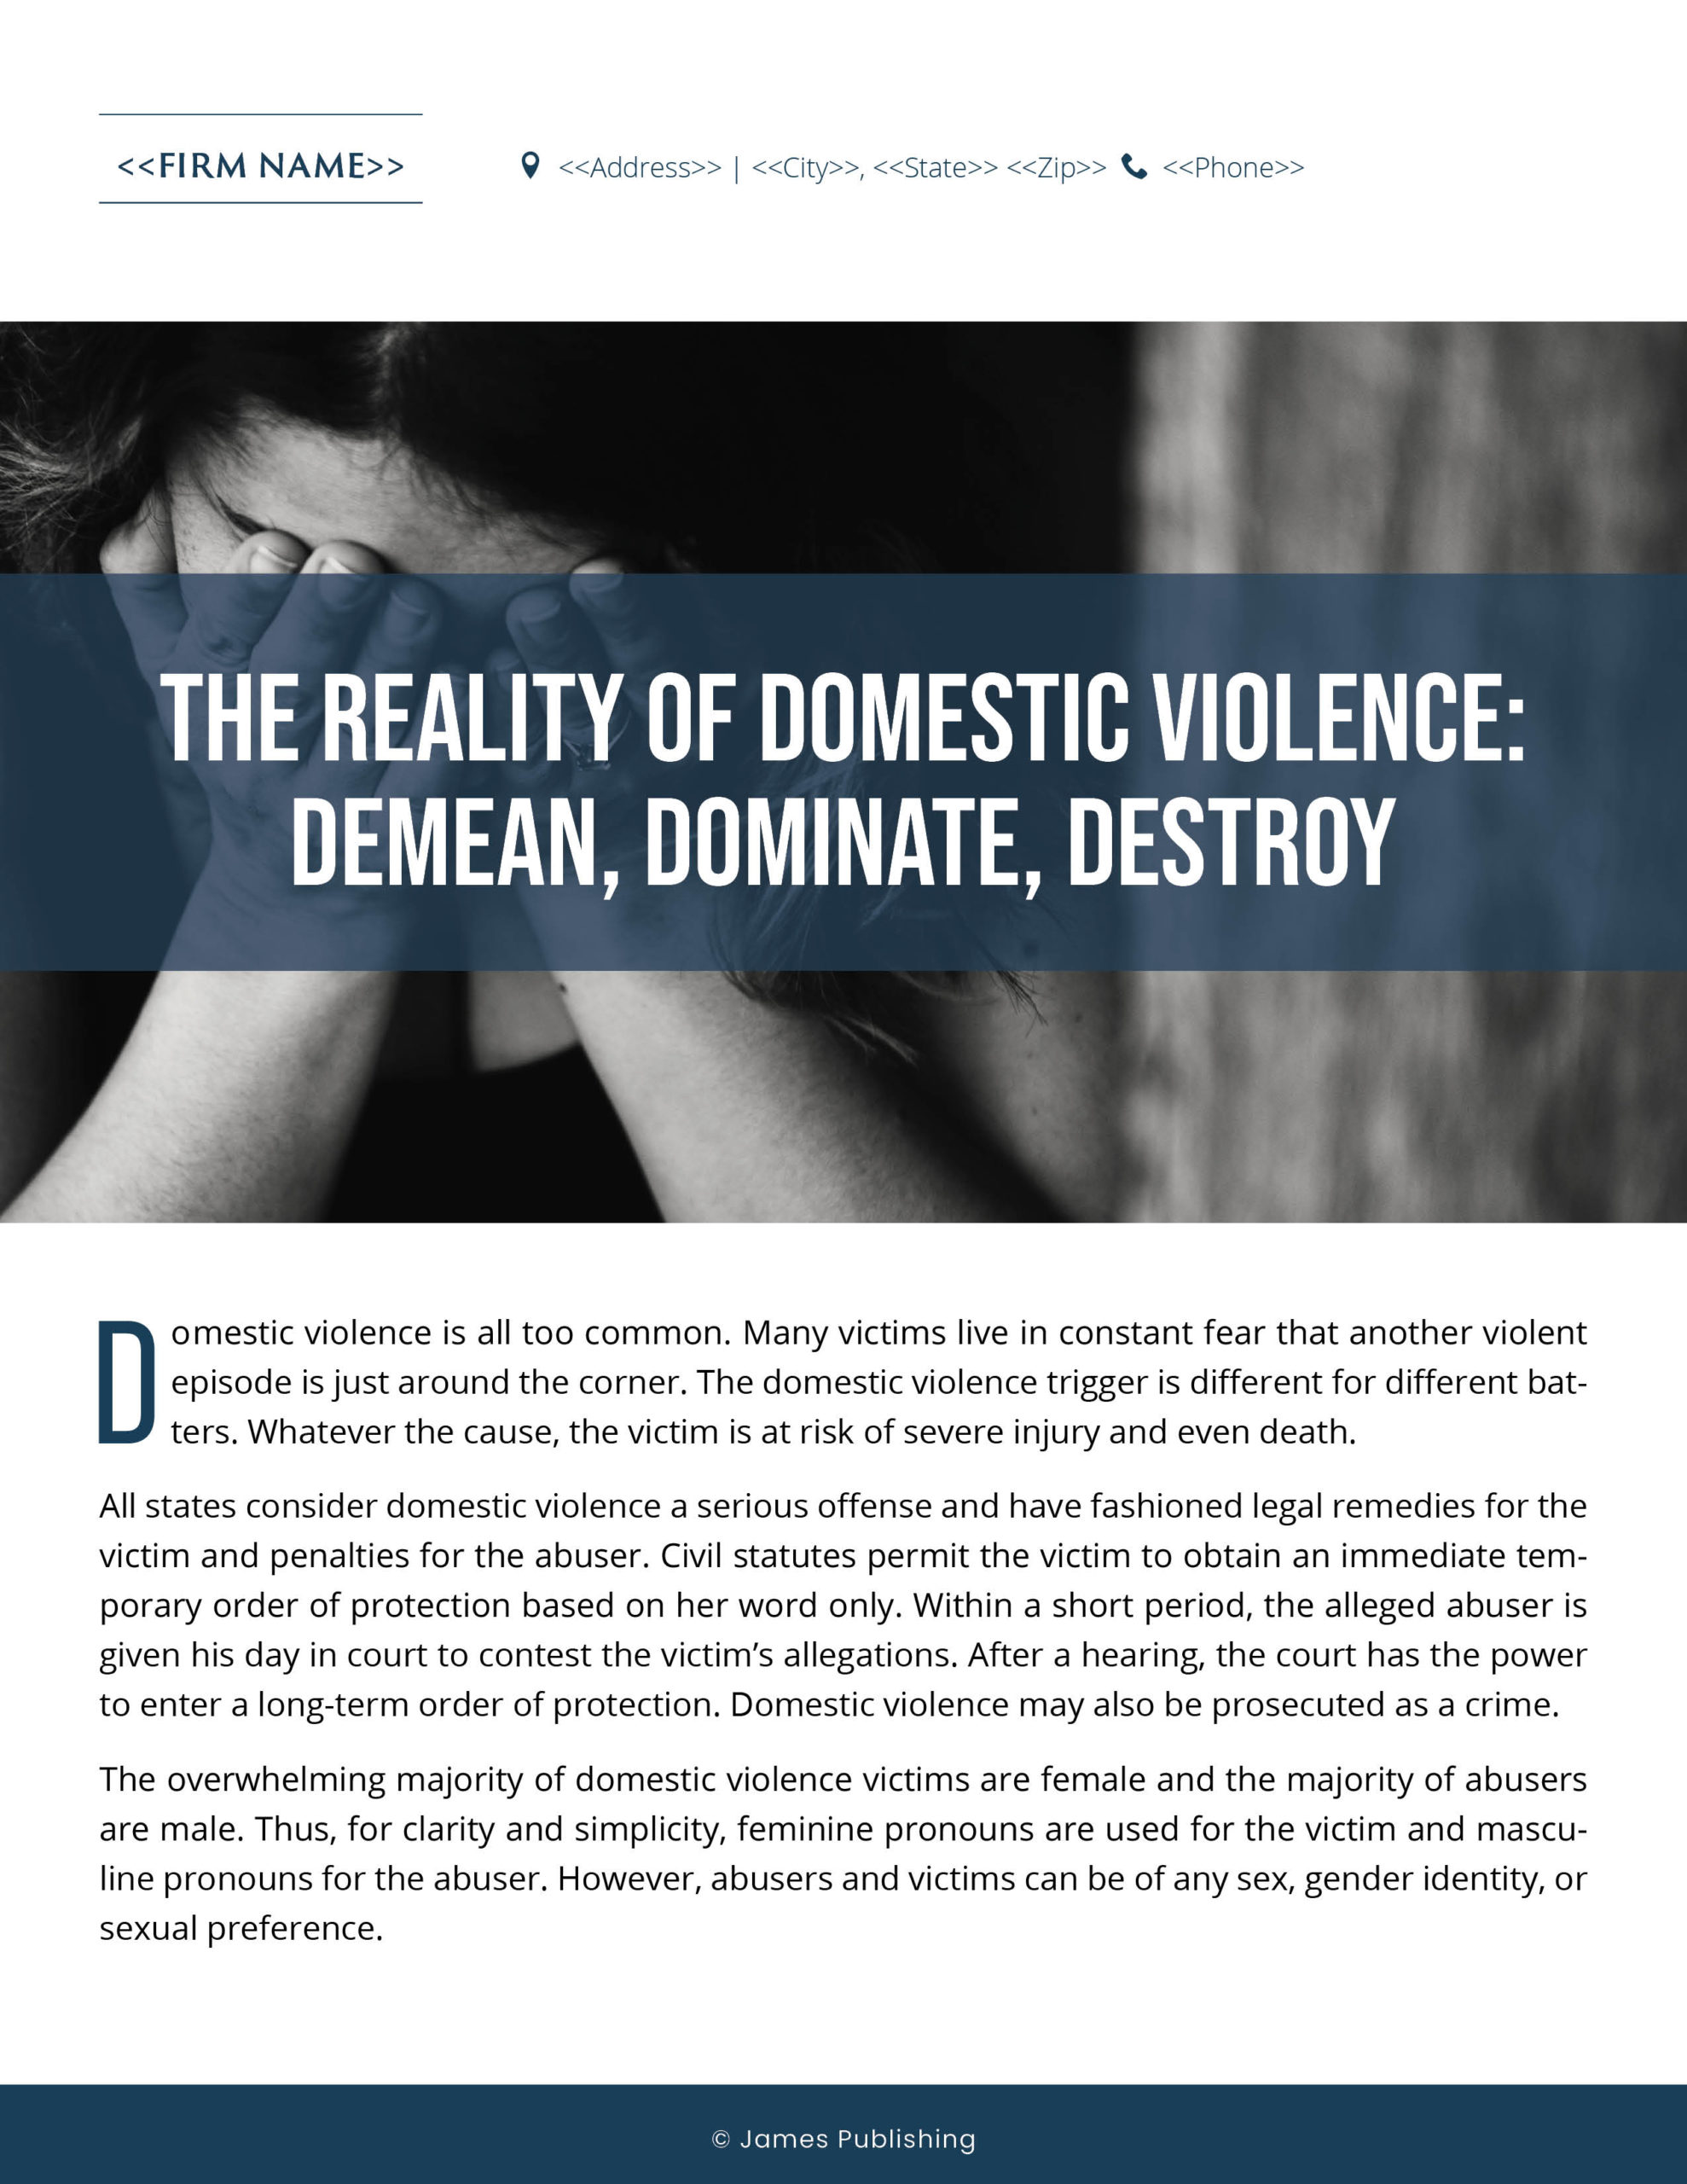 FAM-28 The Reality of Domestic Violence - Demean, Dominate, Destroy